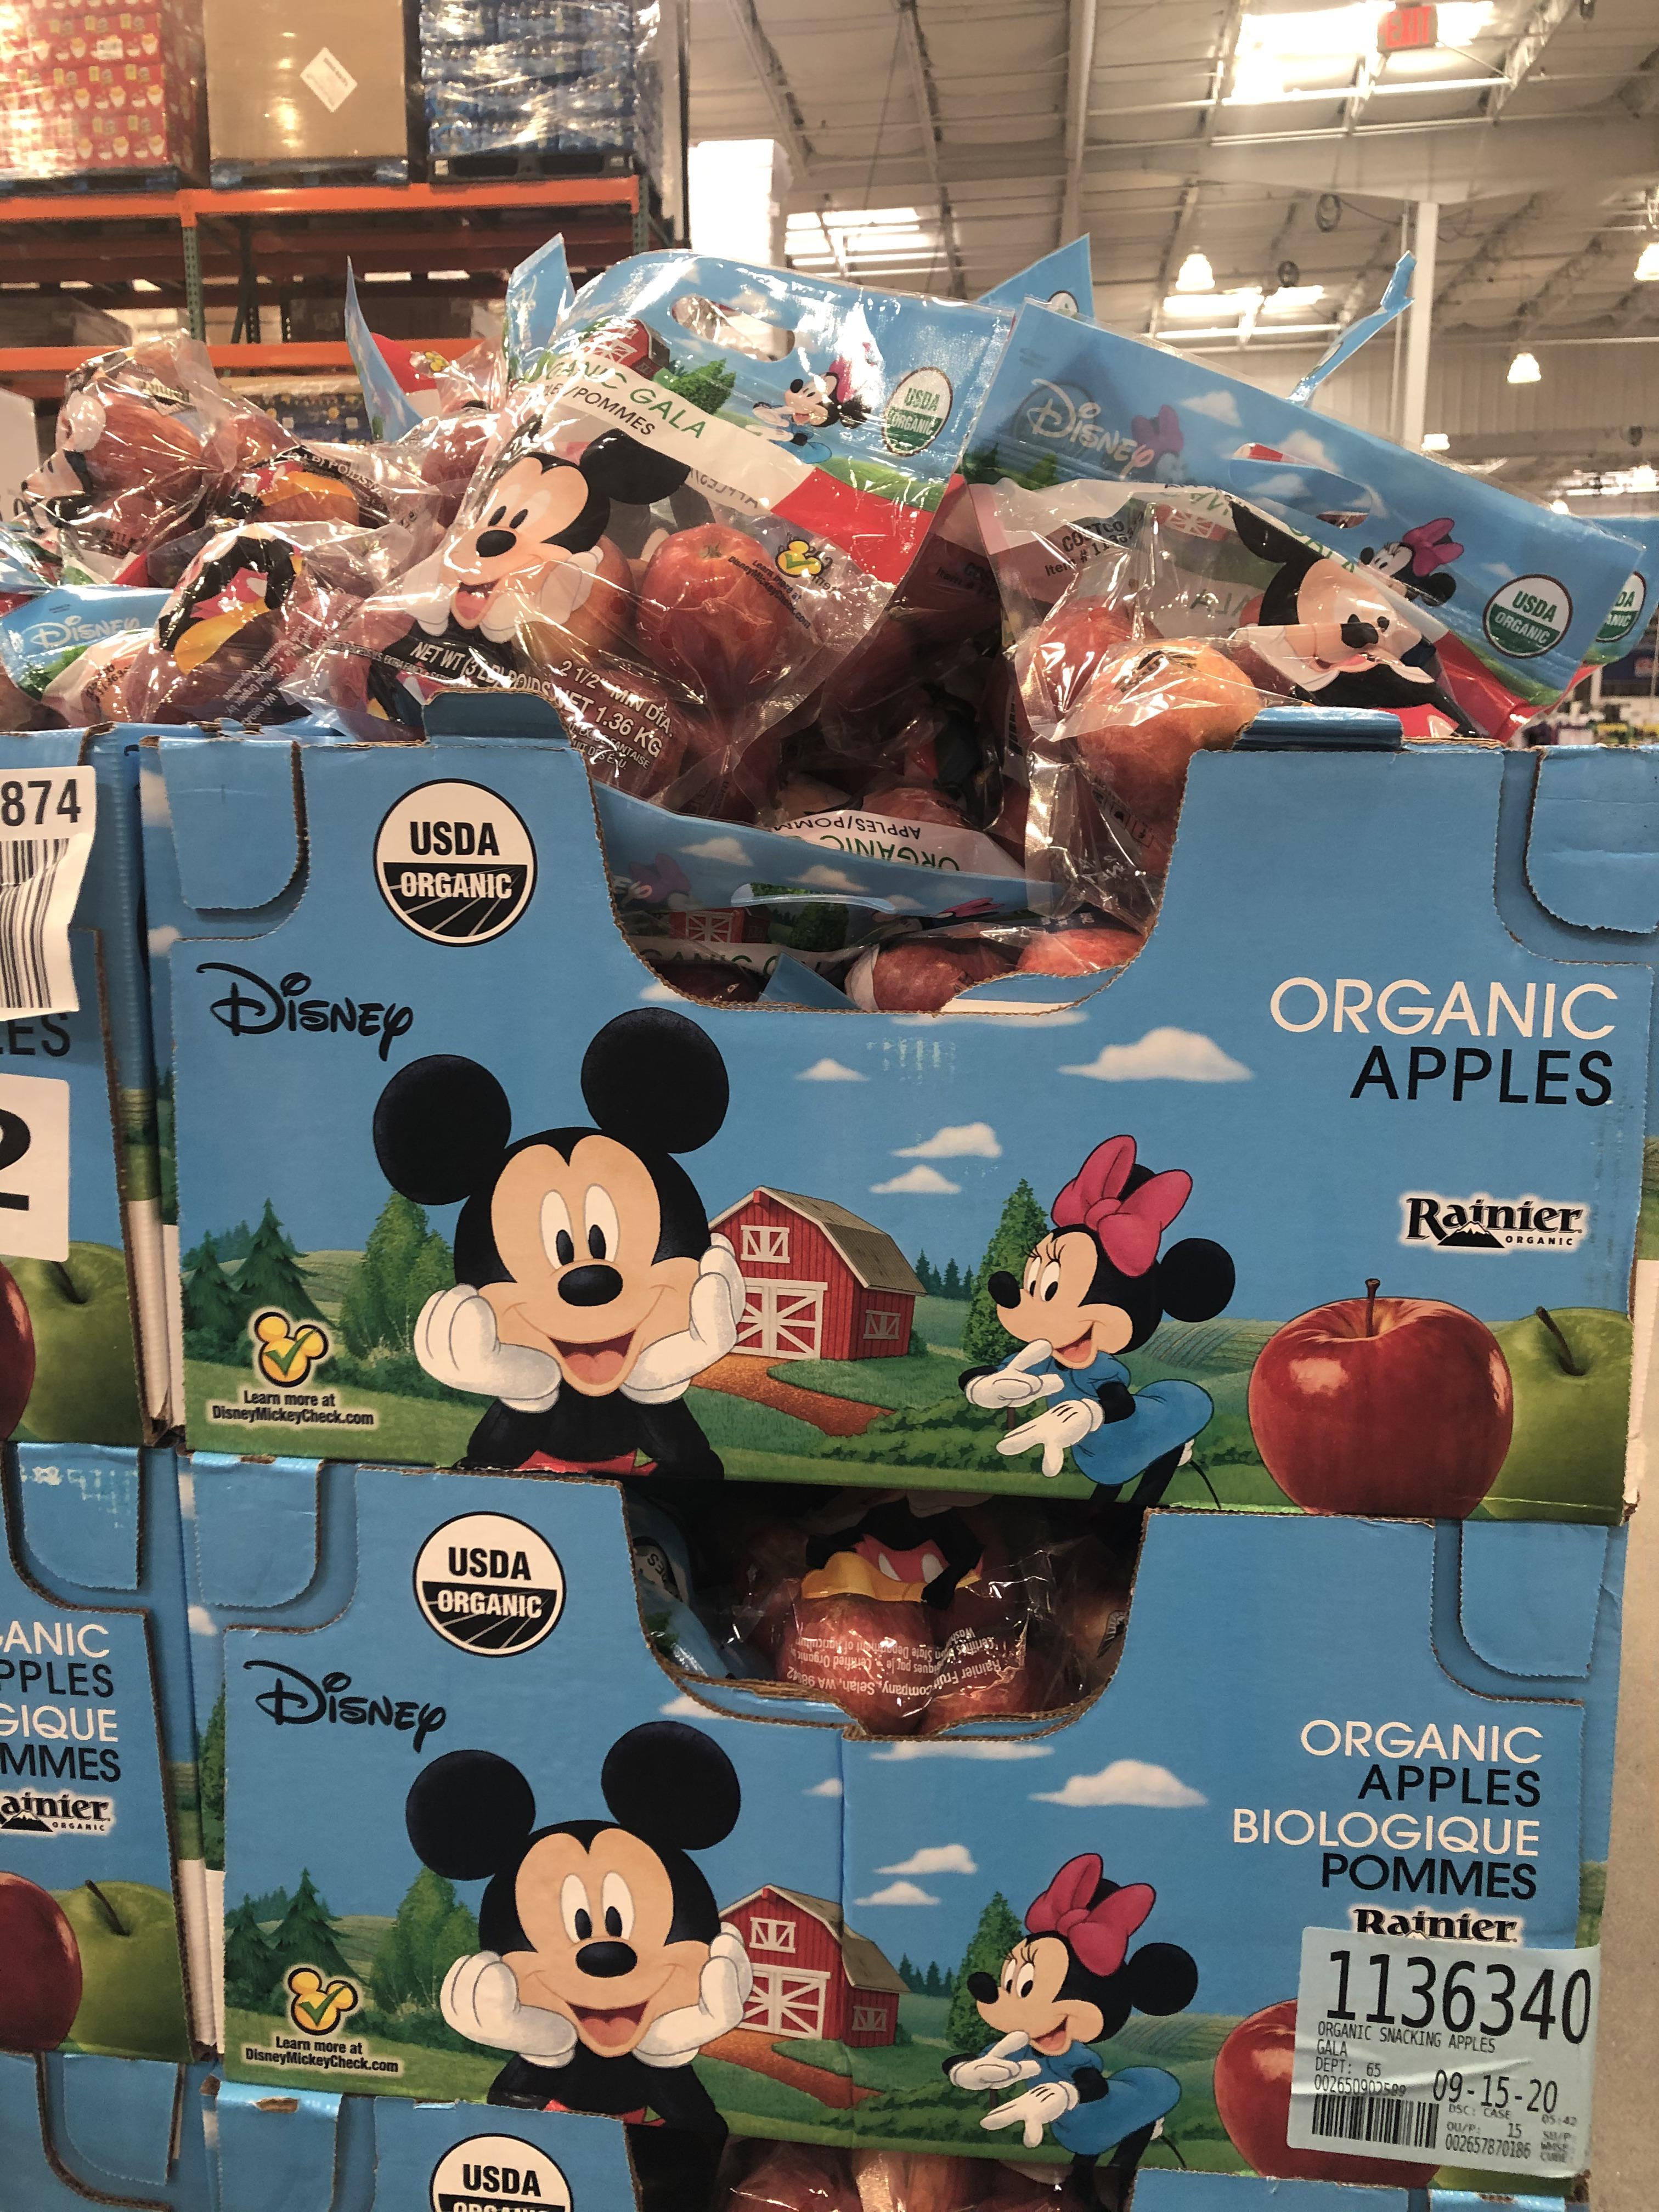 Disney themed apples. Just why?! : r/ofcoursethatsathing